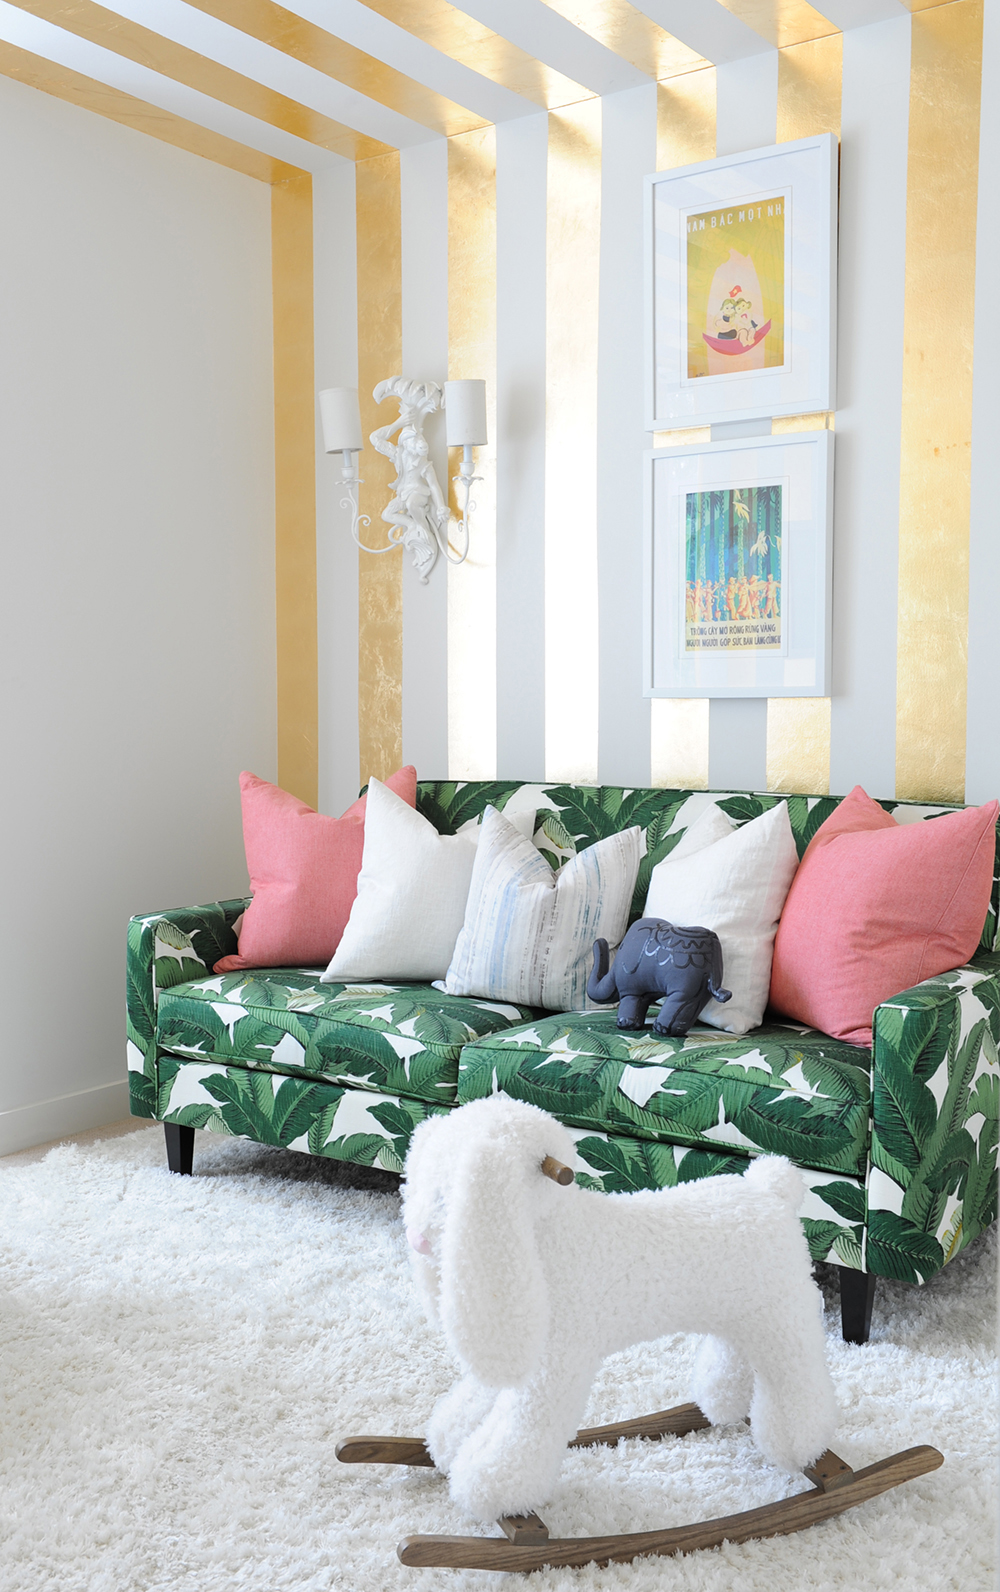 Glam meets the tropics in this stylish nursery.